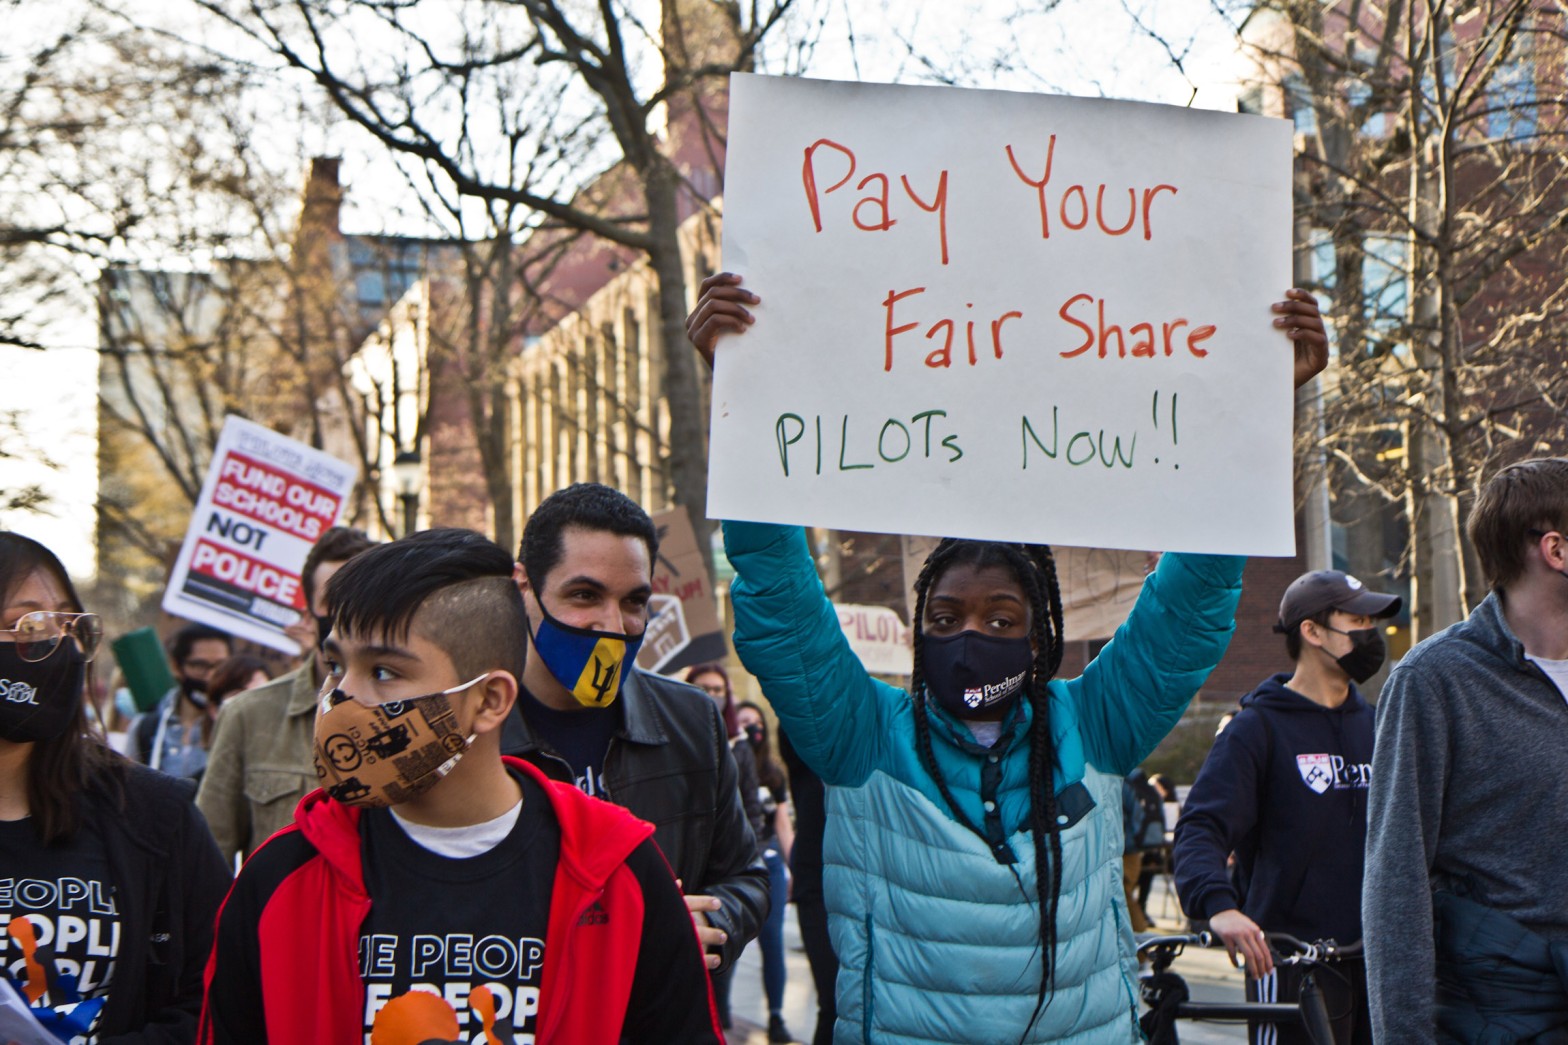 Protesters march on the campus of the University of Pennsylvania demanding the school and Drexel University pay PILOTS to support Philadelphia schools on March 30, 2021. A black student in a blue coat holds up a sign that says, "Pay your fair share PILOTs now!!" Another protestor in the background holds a sign that reads, "Fund our schools not police."